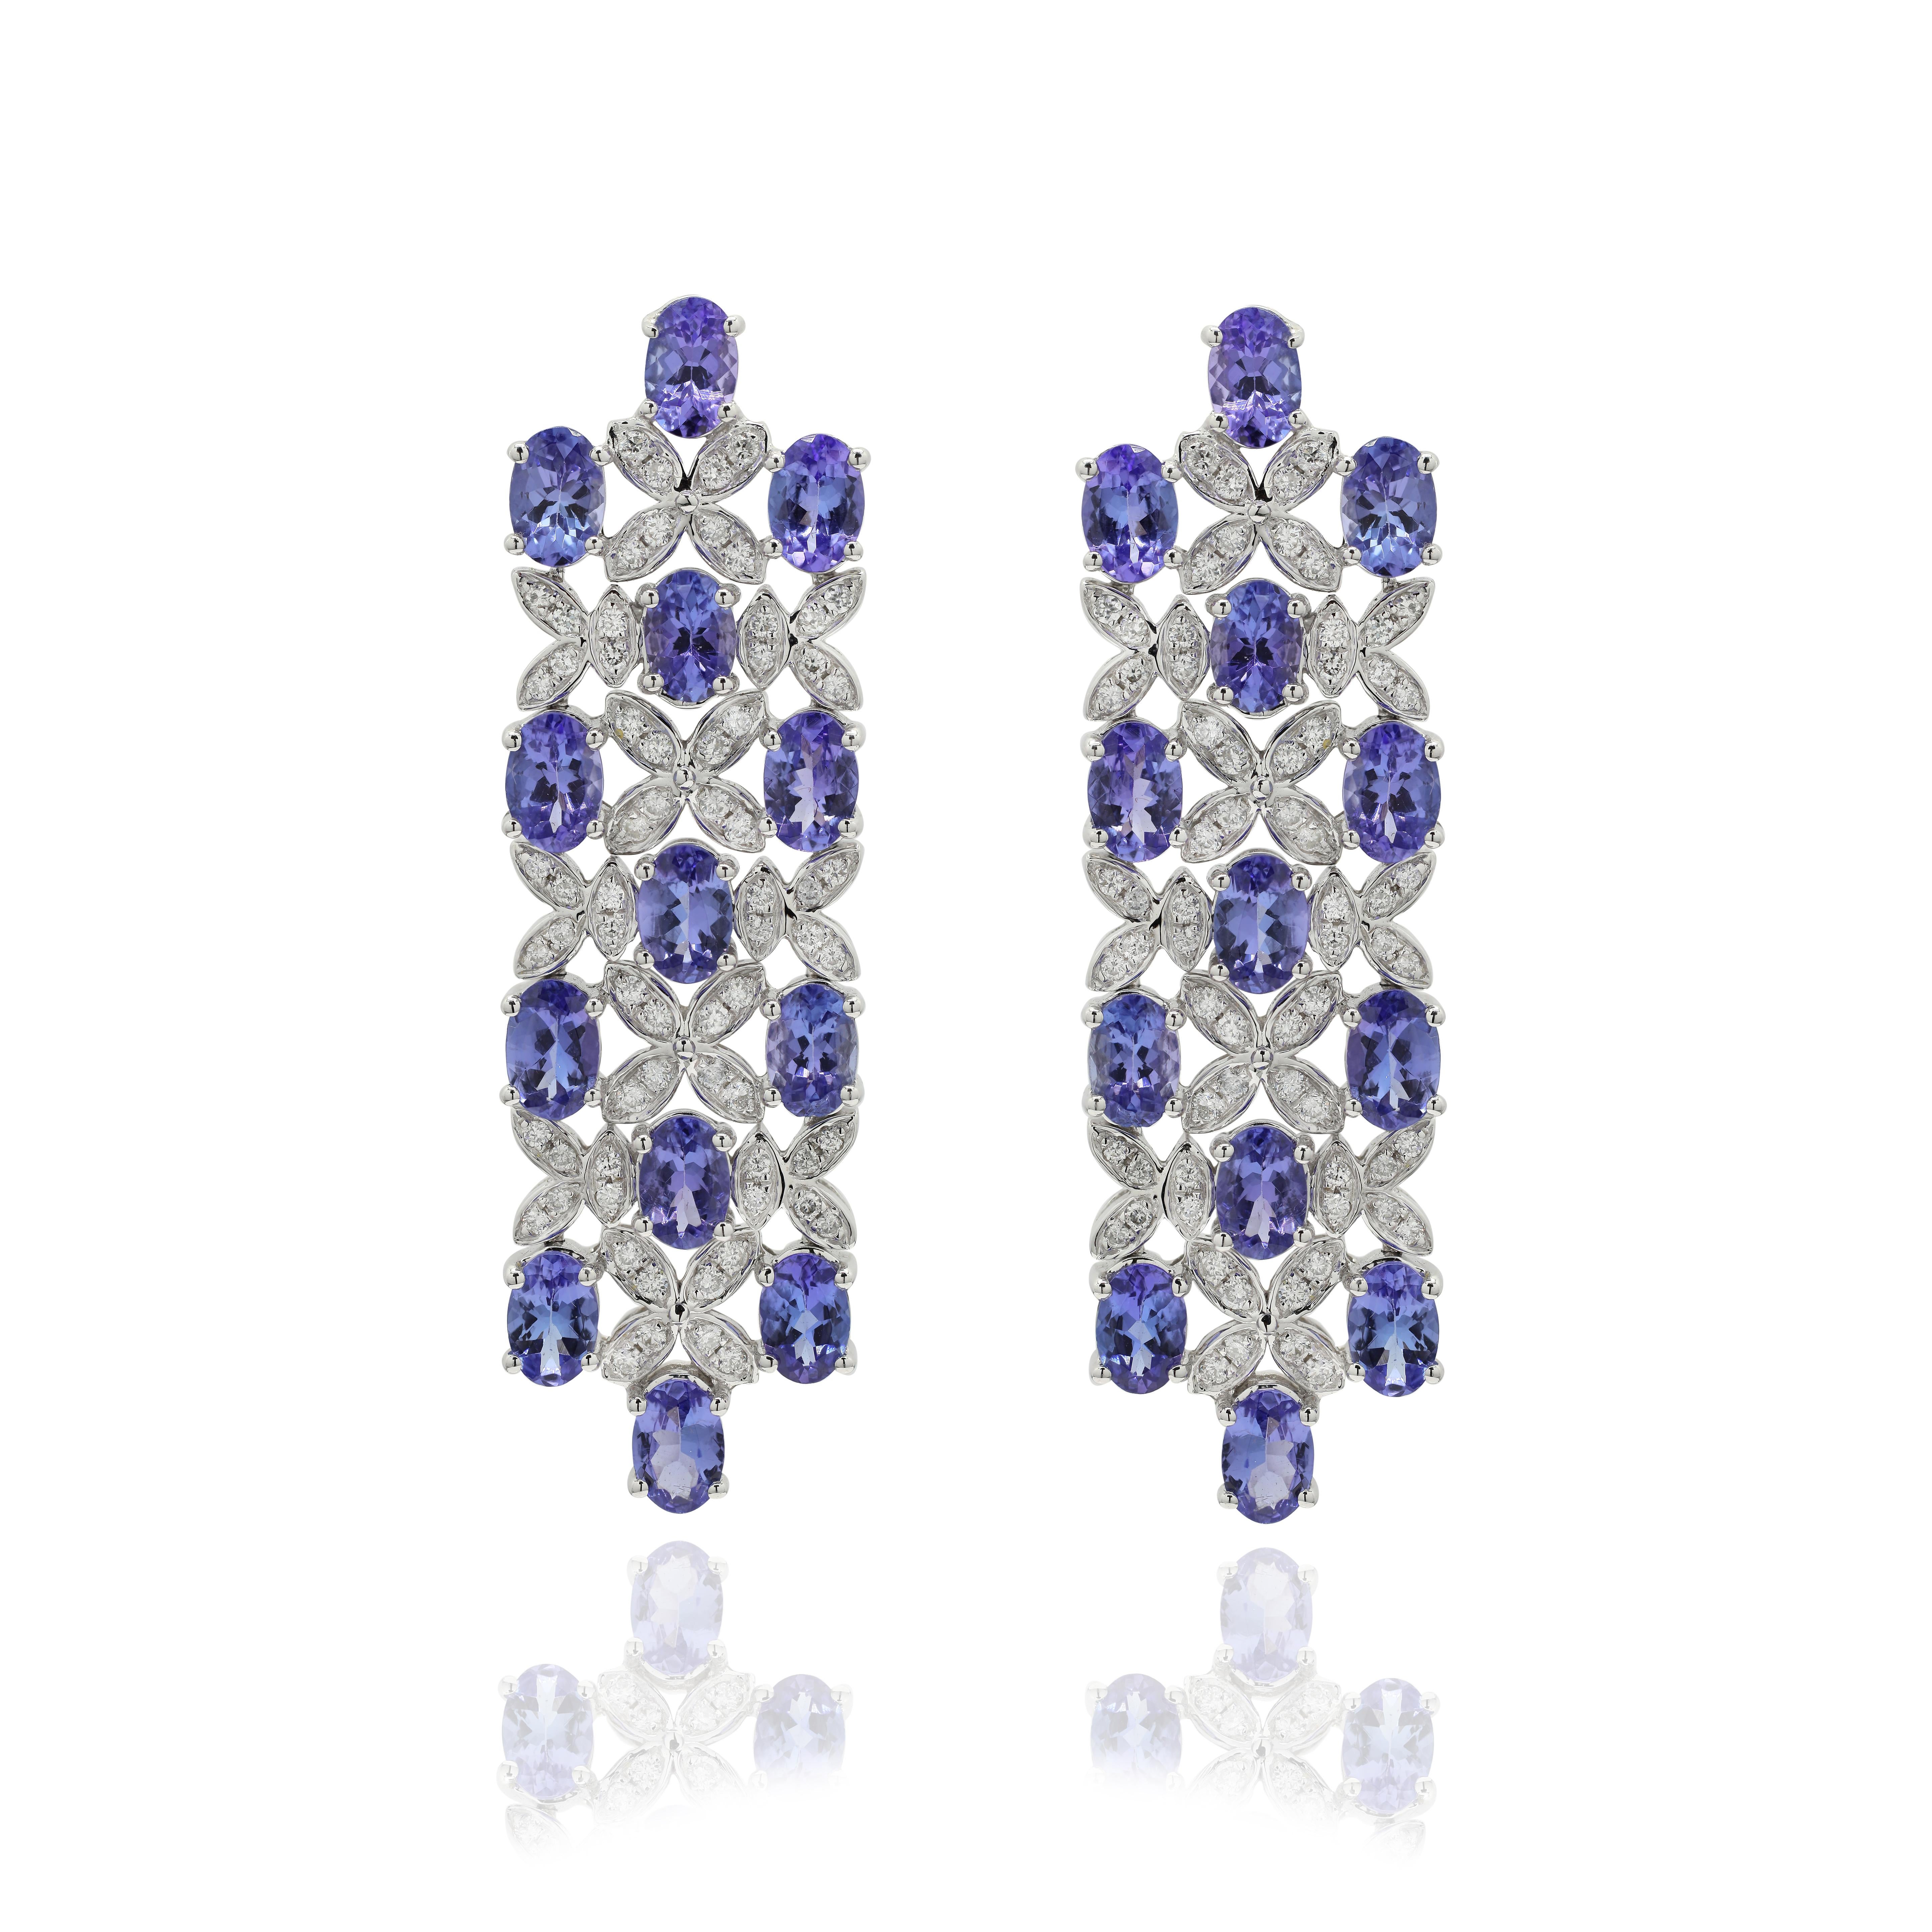 Tanzanite and Diamond Dangle Cocktail Earrings to make a statement with your look. These earrings create a sparkling, luxurious look featuring oval cut gemstone.
If you love to gravitate towards unique styles, this piece of jewelry is perfect for